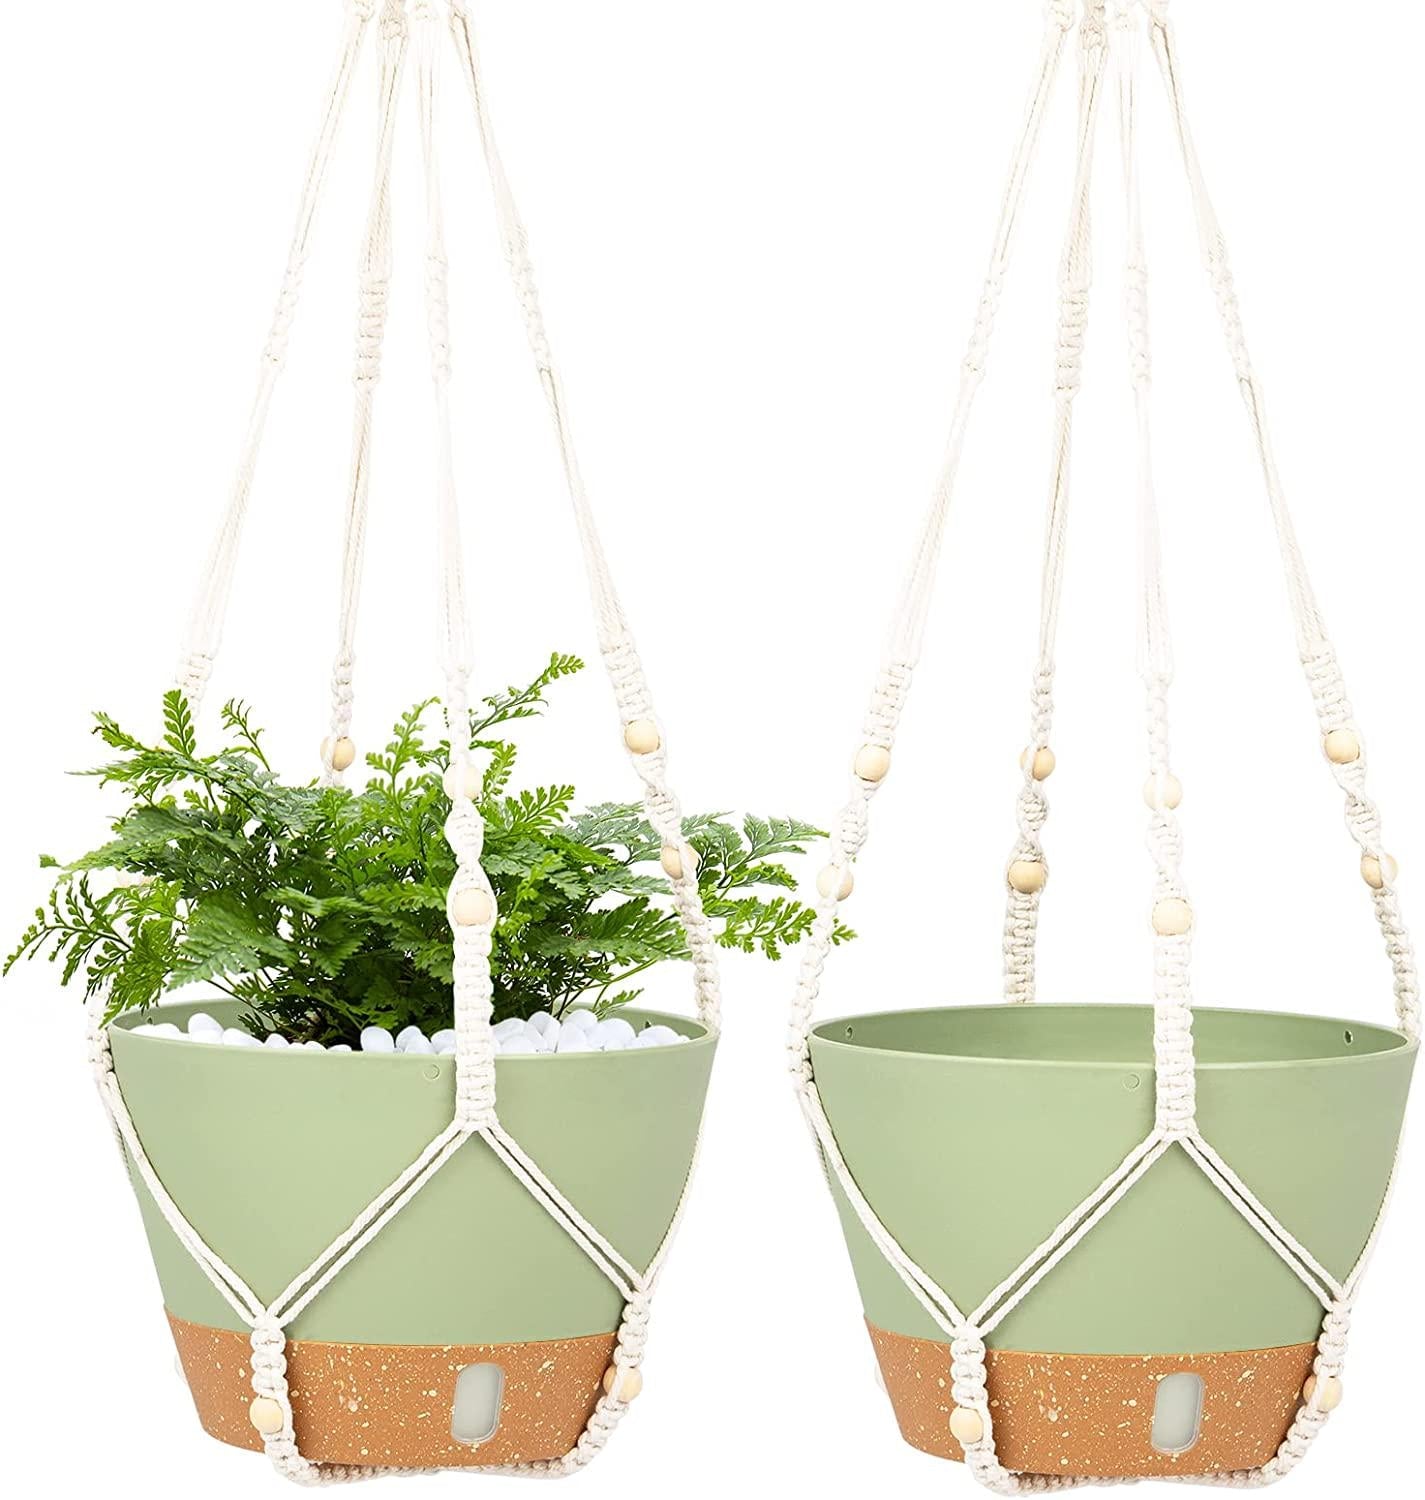 QCQHDU Hanging Planters for Indoor Plants,2 Pack Macrame Plant Hanger with Pots with Cotton Rope,Hanging Plant Holder Outdoor Home Decor. (Green-8 inch)-